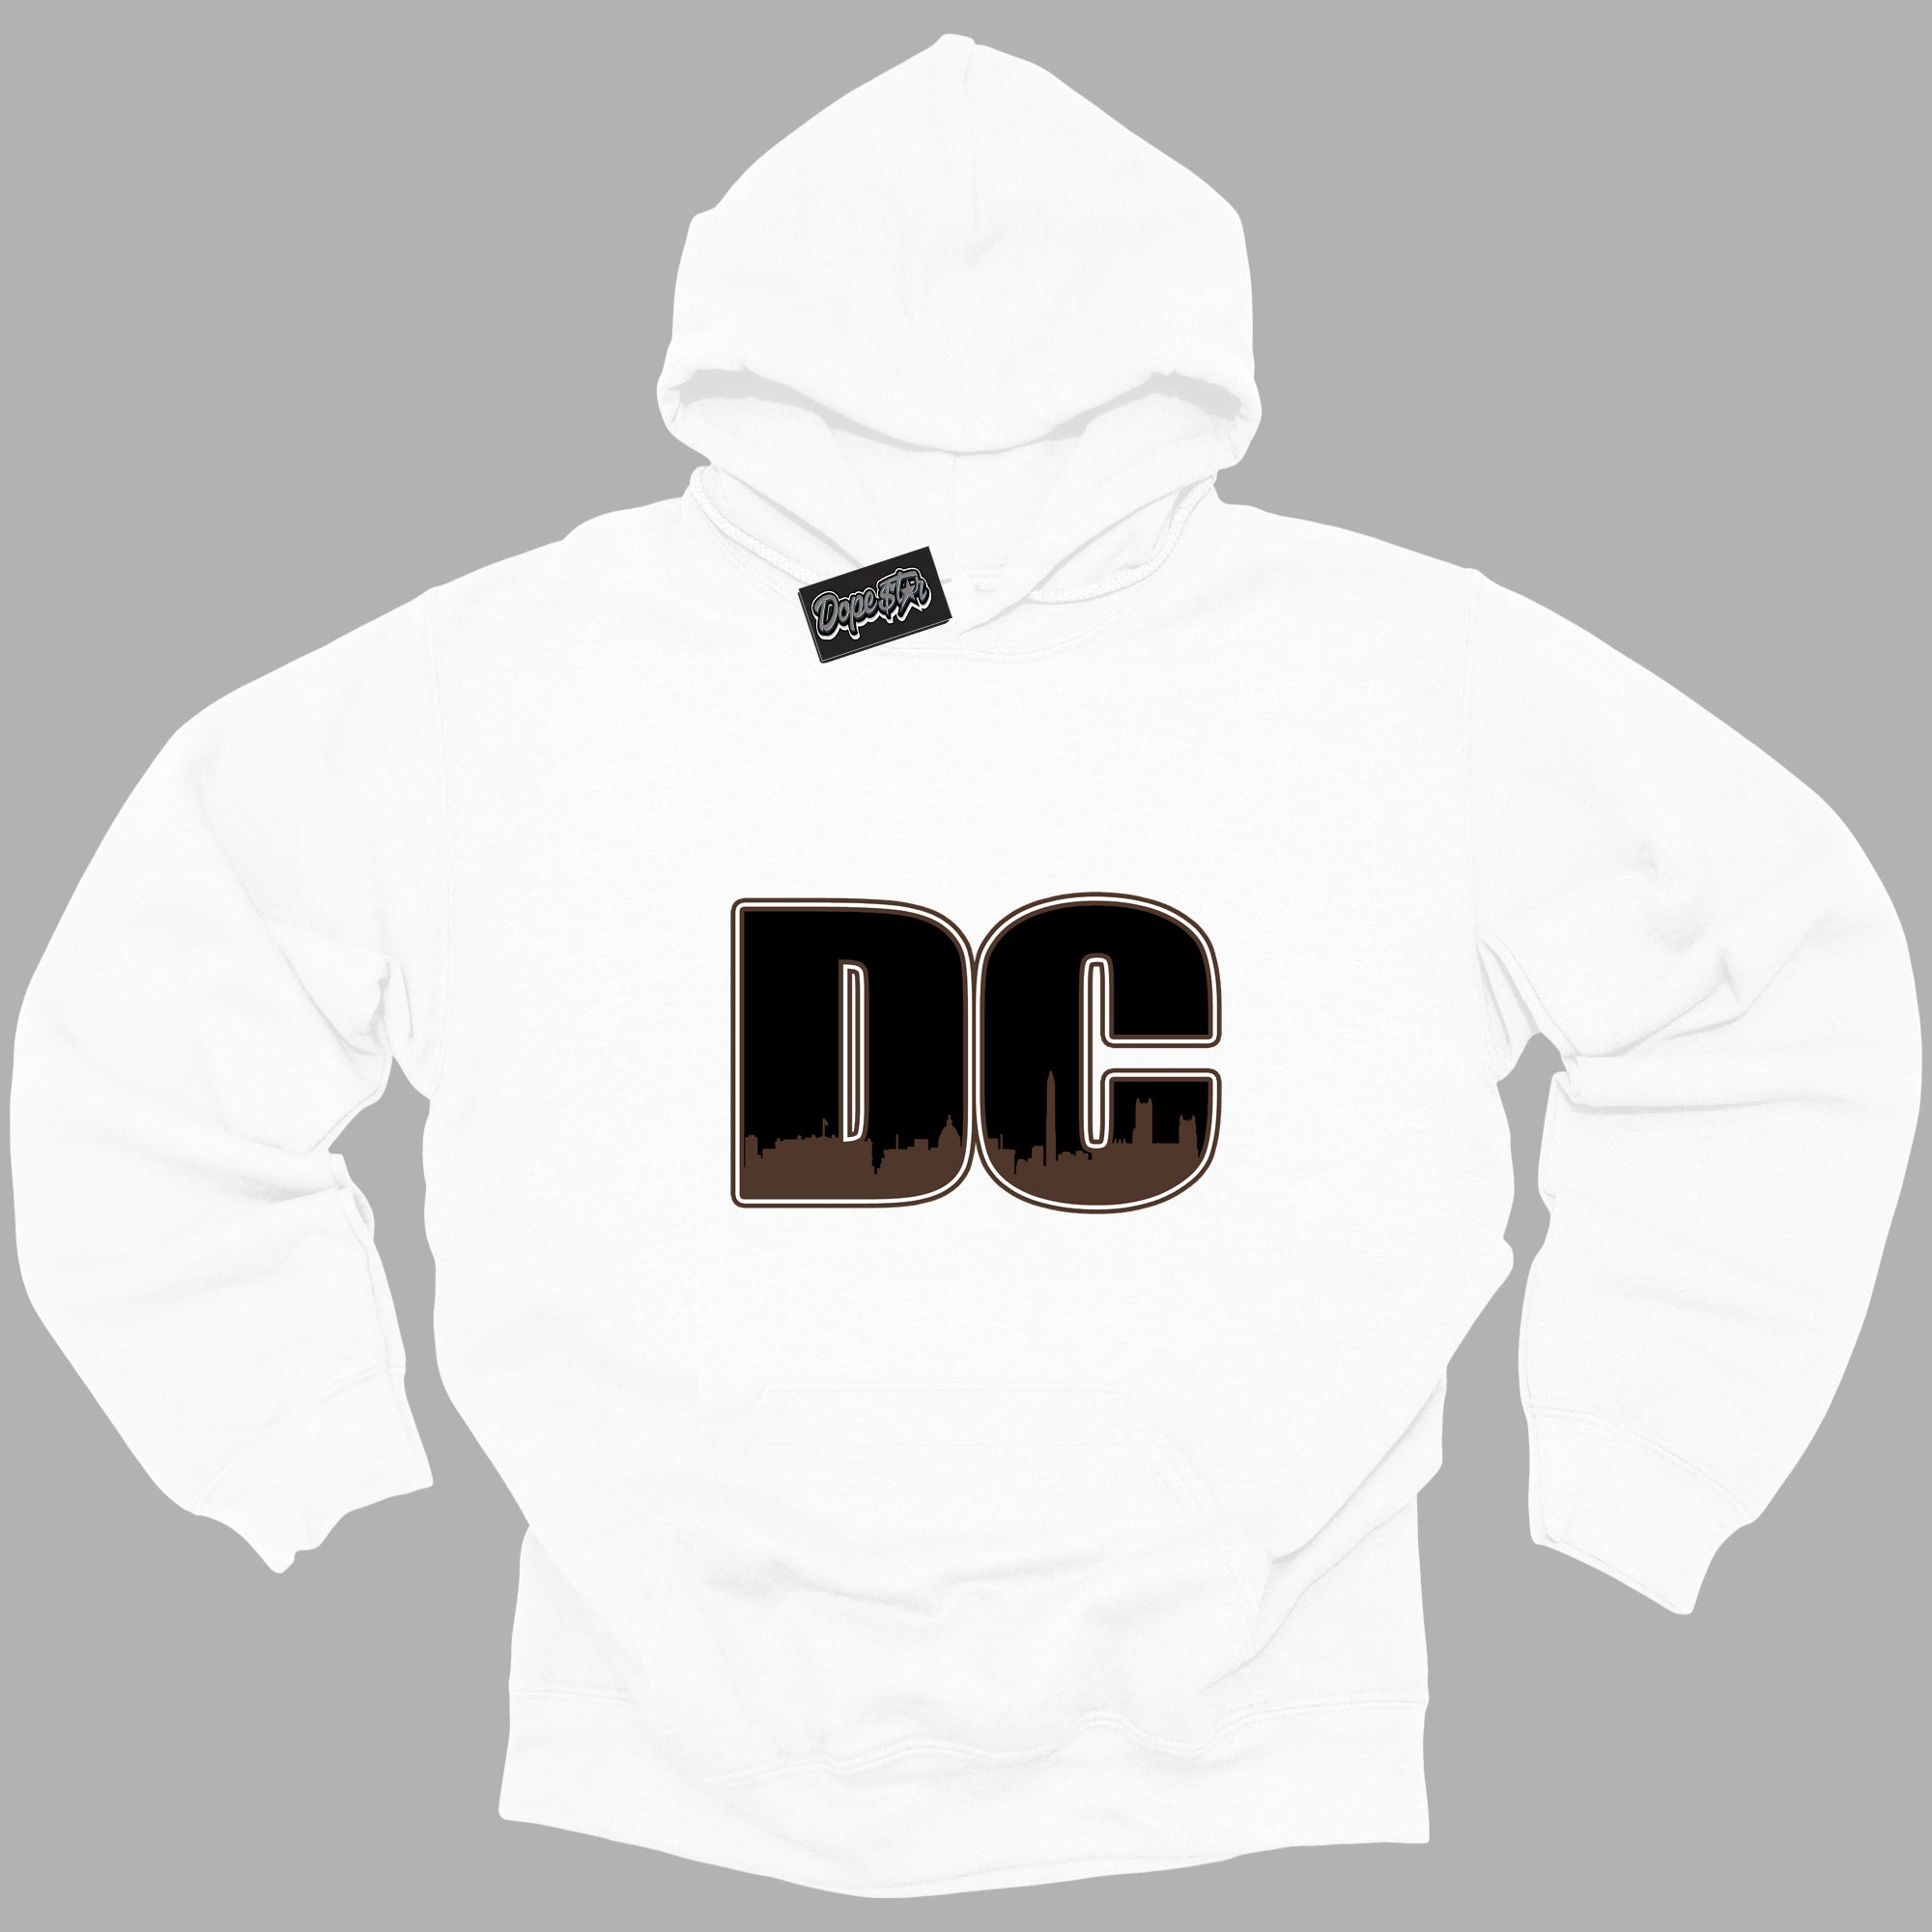 Cool White Graphic DopeStar Hoodie with “ DC “ print, that perfectly matches Palomino 1s sneakers